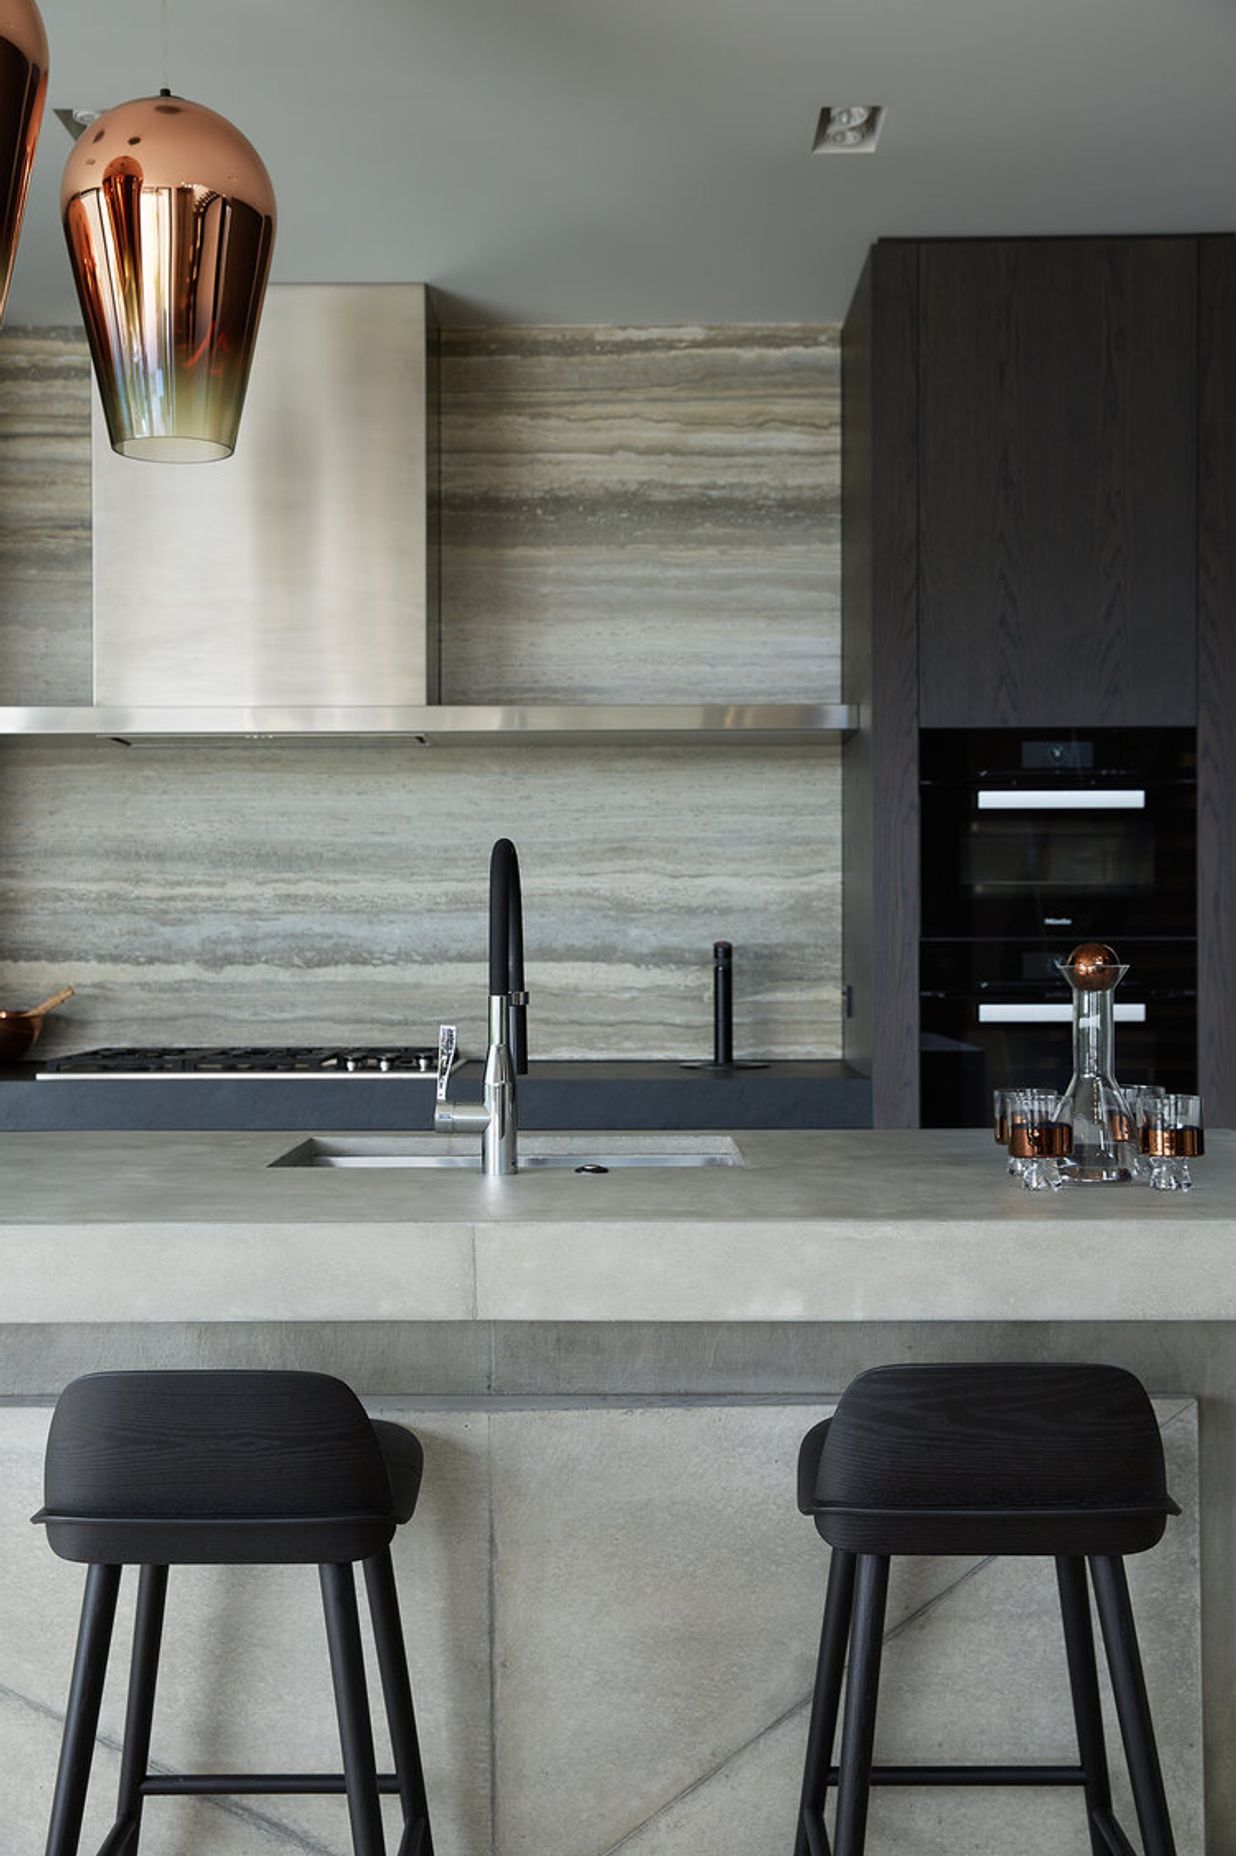 The backsplash imitates the sedimented layers of sandboxes from the 1970s.